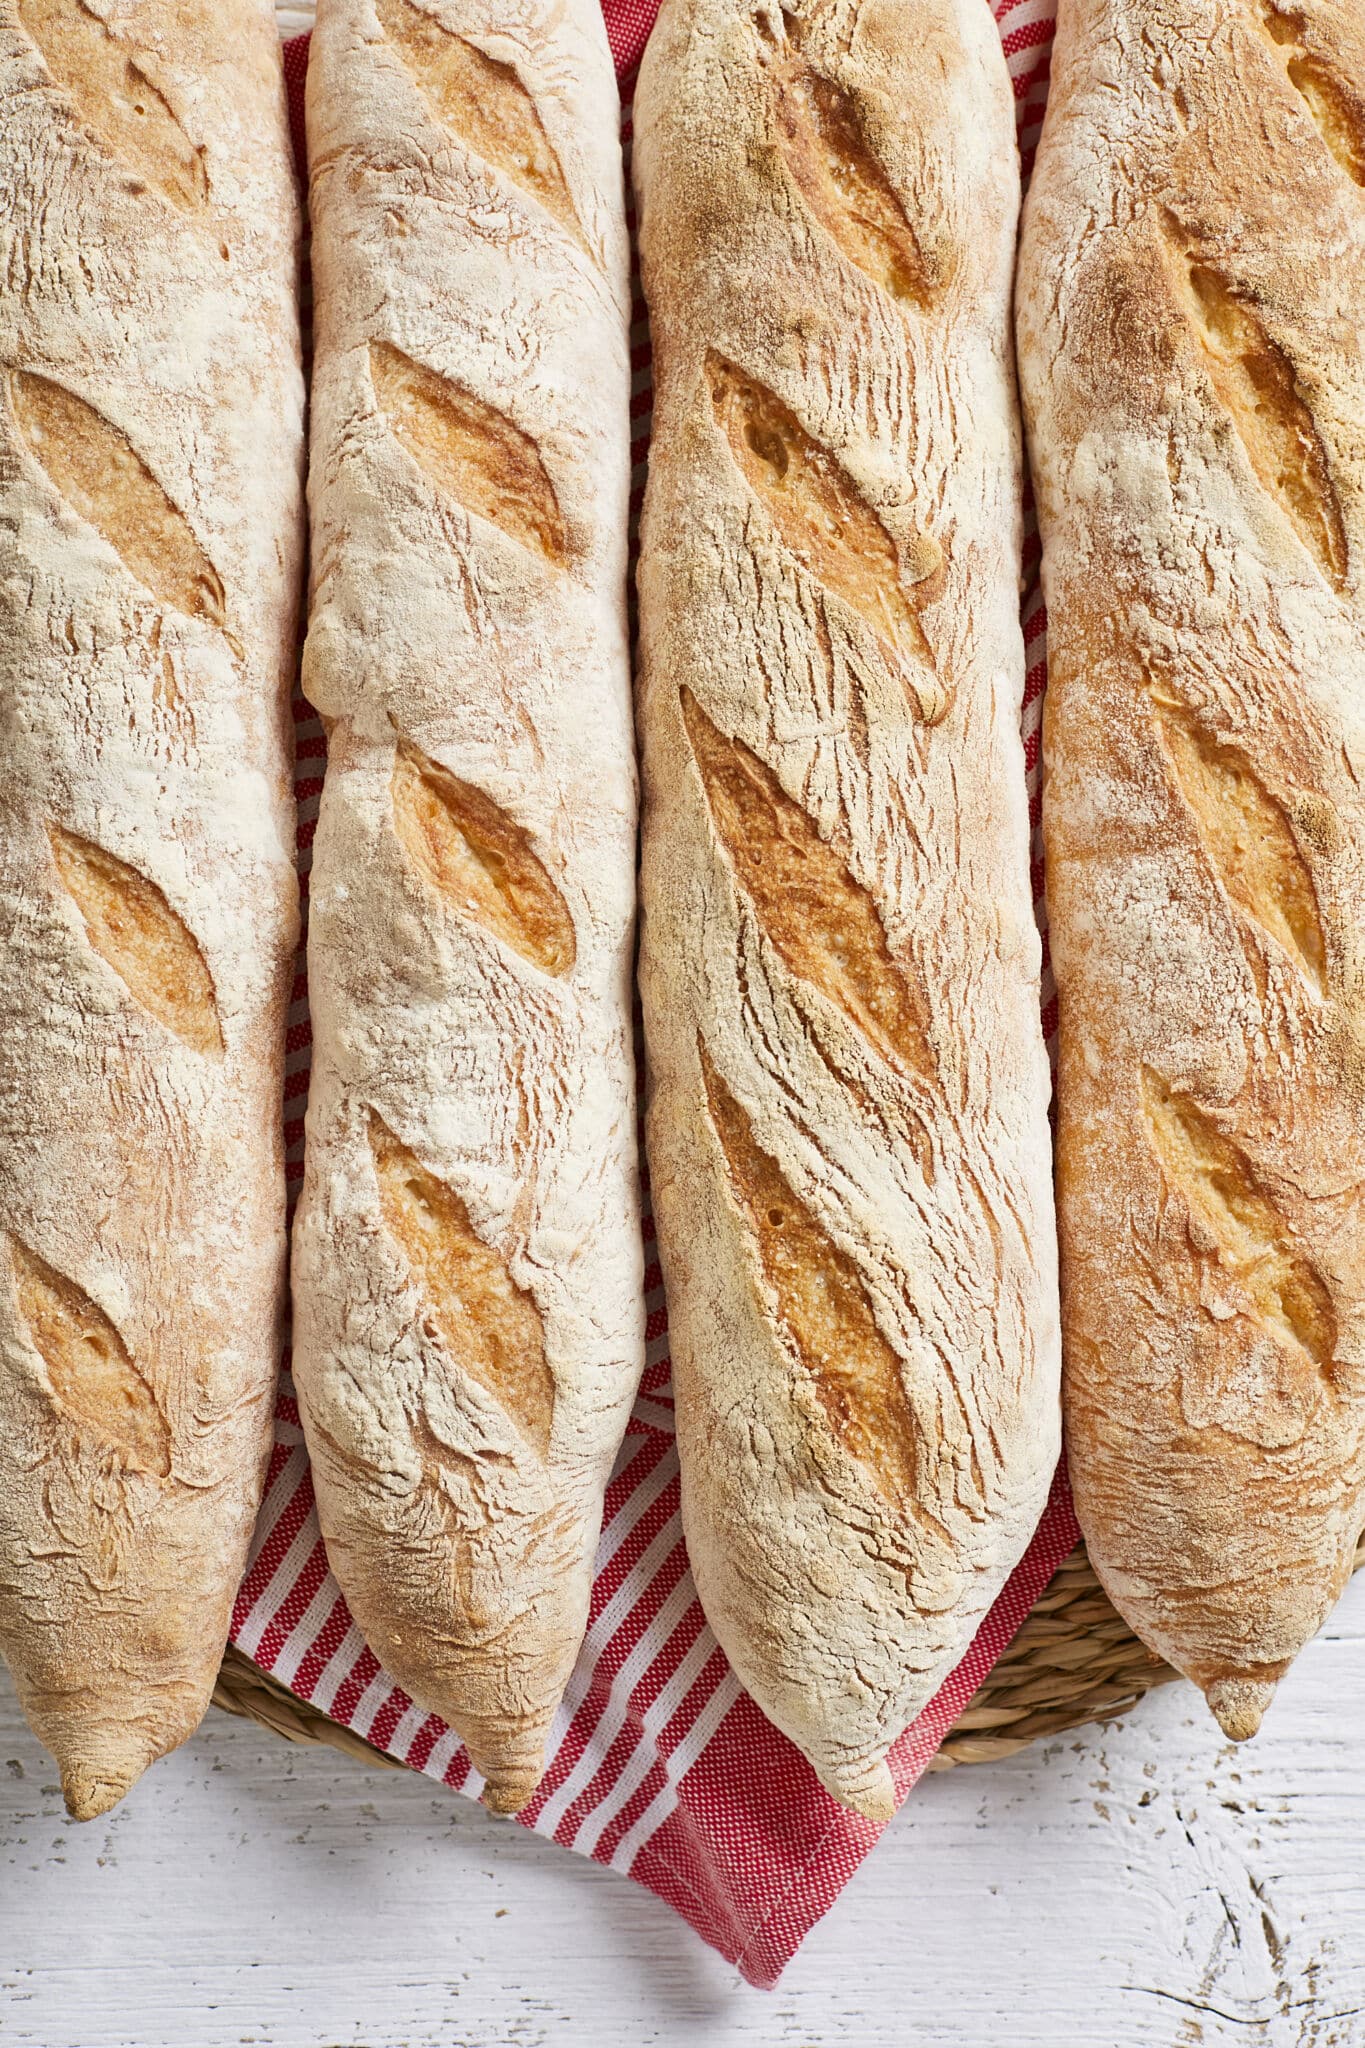 Baguettes are baked to perfection golden brown. 